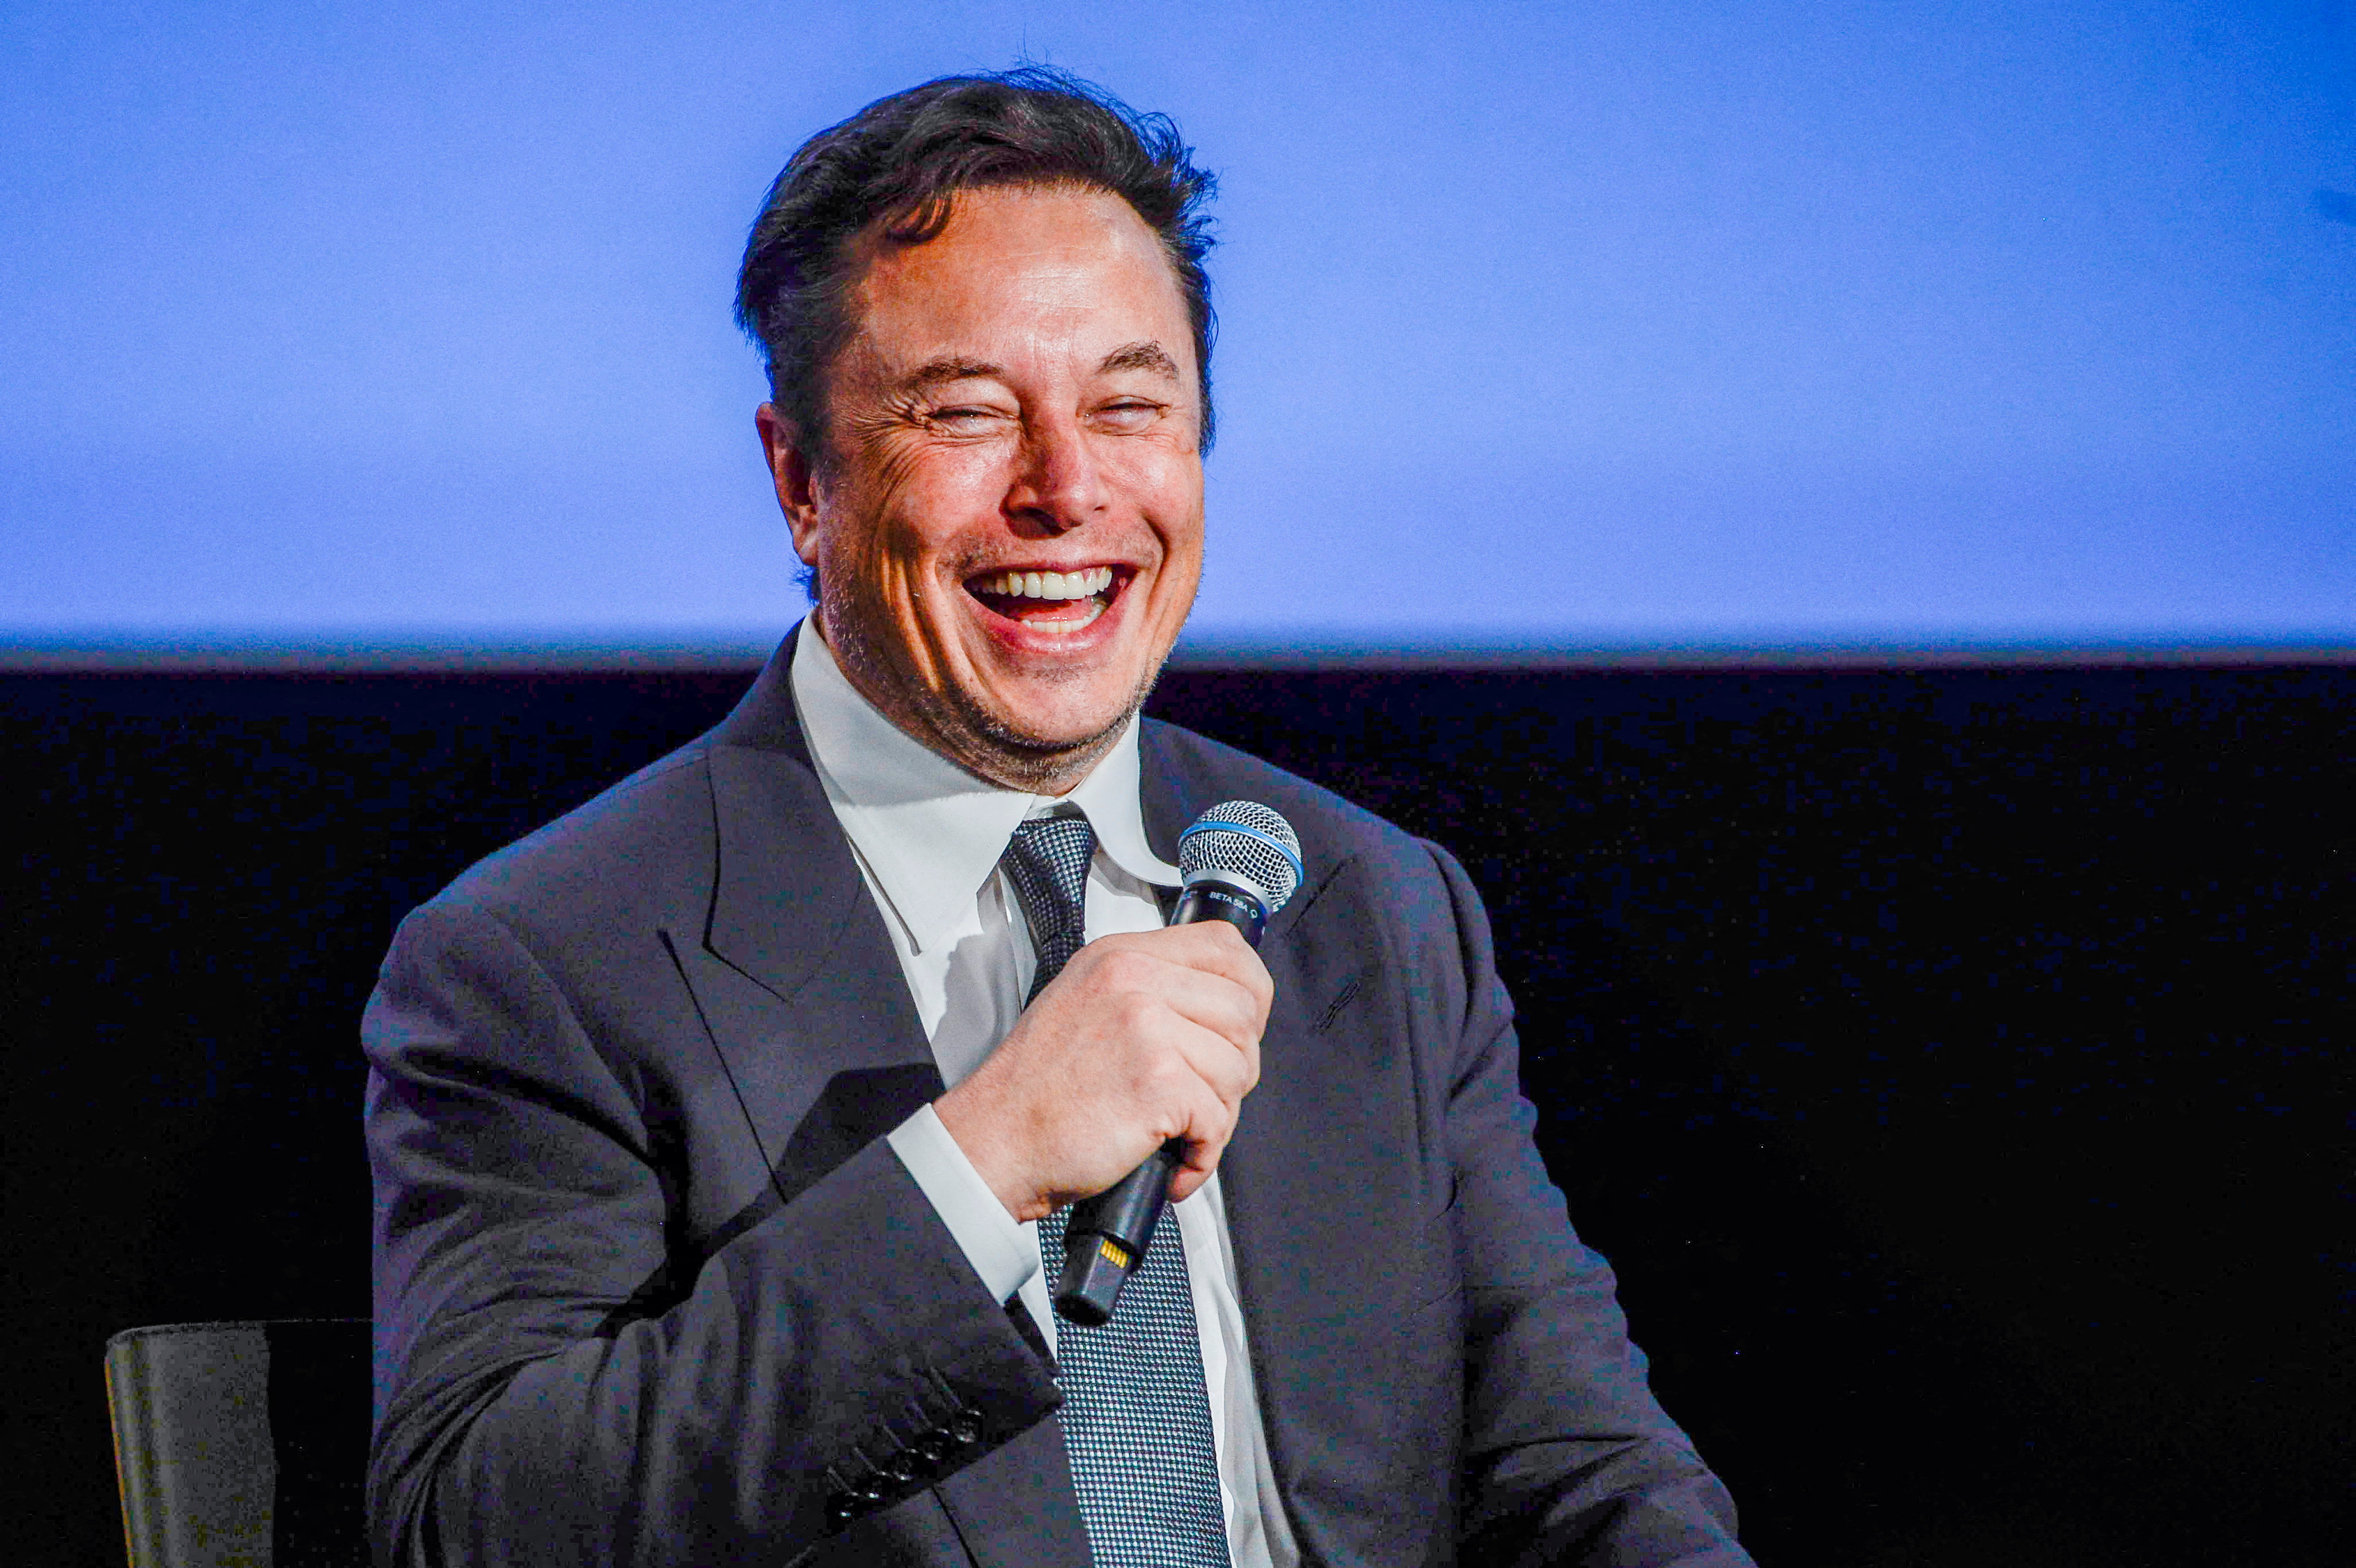 FILE PHOTO: Tesla founder Elon Musk attends Offshore Northern Seas 2022 in Stavanger, Norway August 29, 2022. NTB/Carina Johansen via REUTERS   ATTENTION EDITORS - THIS IMAGE WAS PROVIDED BY A THIRD PARTY. NORWAY OUT. NO COMMERCIAL OR EDITORIAL SALES IN NORWAY./File Photo/File Photo